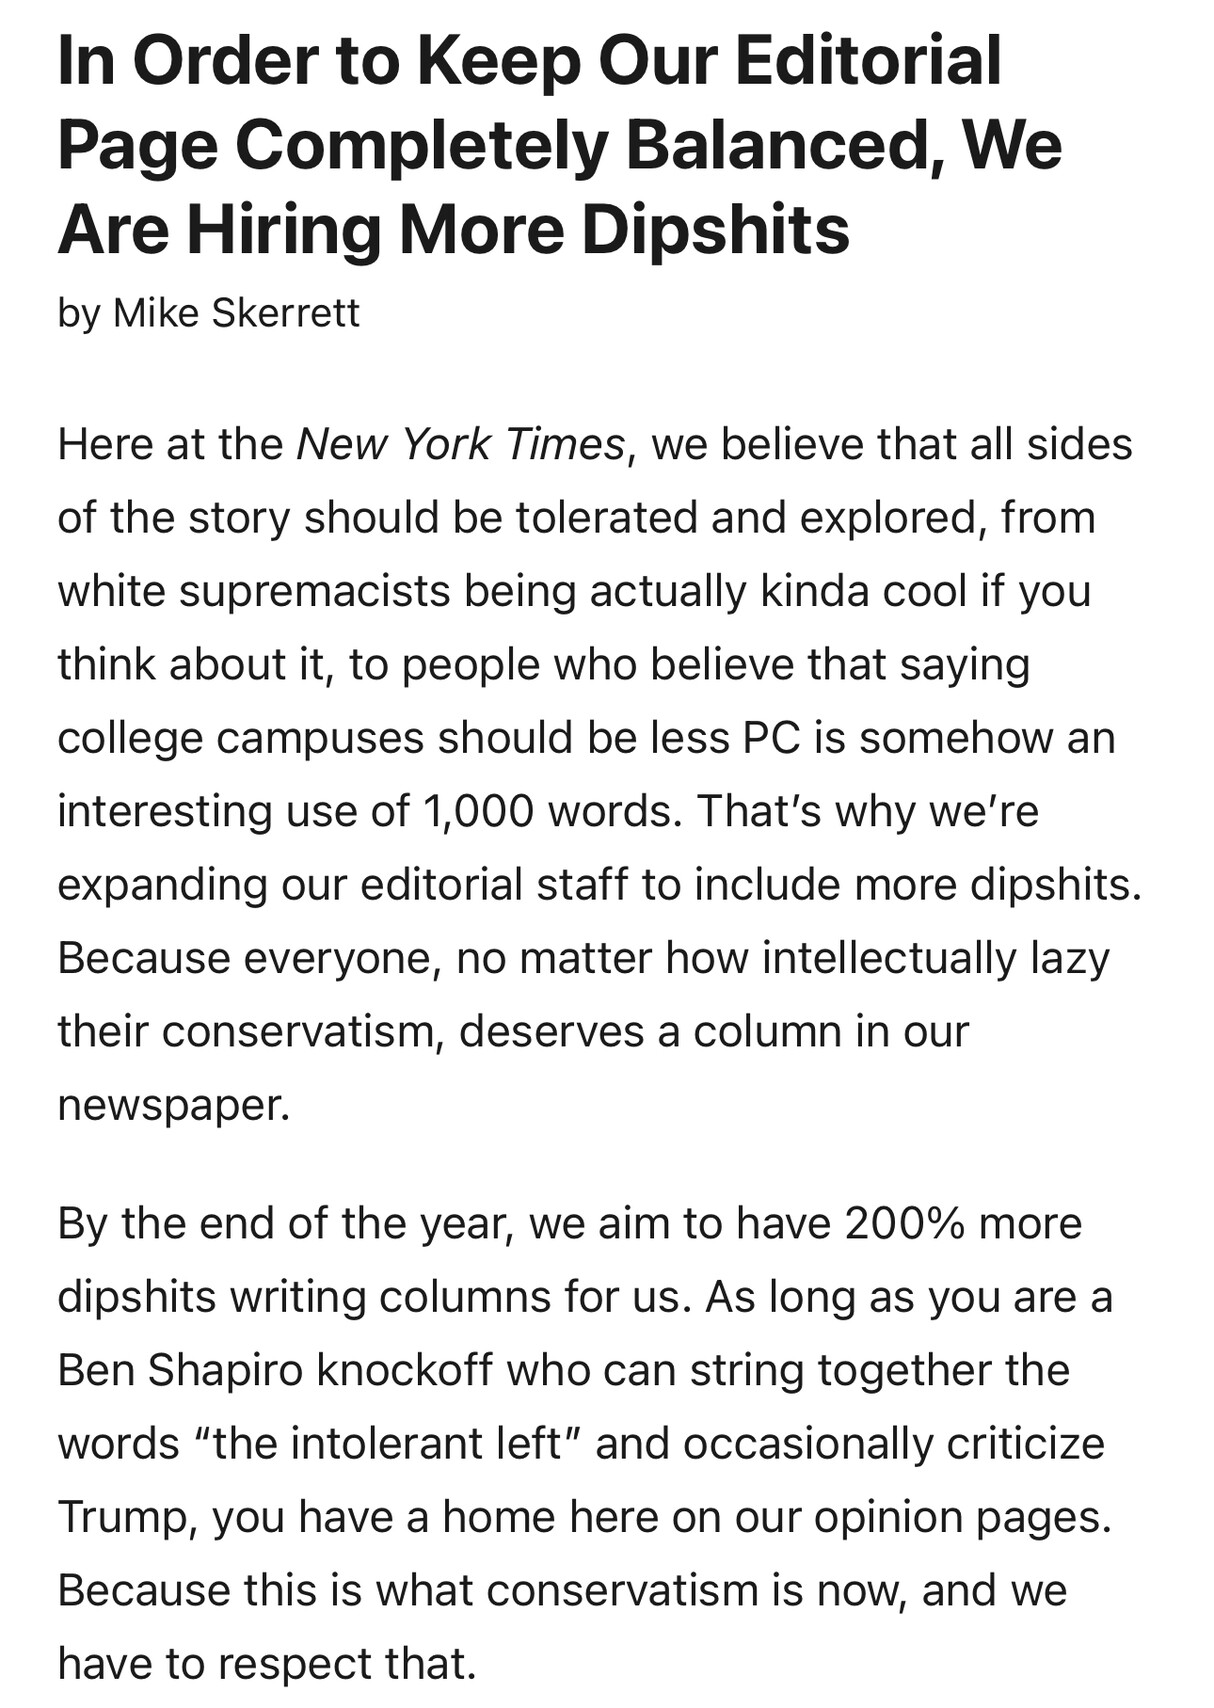 2018, McSweeneys article: In Order to Keep Our Editorial Page Completely Balanced, We Are Hiring More Dipshits
by Mike Skerrett
Here at the New York Times, we believe that all sides of the story should be tolerated and explored, from white supremacists being actually kinda cool if you think about it, to people who believe that saying college campuses should be less PC is somehow an interesting use of 1,000 words. That’s why we’re expanding our editorial staff to include more dipshits. Because everyone, no matter how intellectually lazy their conservatism, deserves a column in our newspaper.

By the end of the year, we aim to have 200% more dipshits writing columns for us. As long as you are a Ben Shapiro knockoff who can string together the words “the intolerant left” and occasionally criticize Trump, you have a home here on our opinion pages. Because this is what conservatism is now, and we have to respect that.